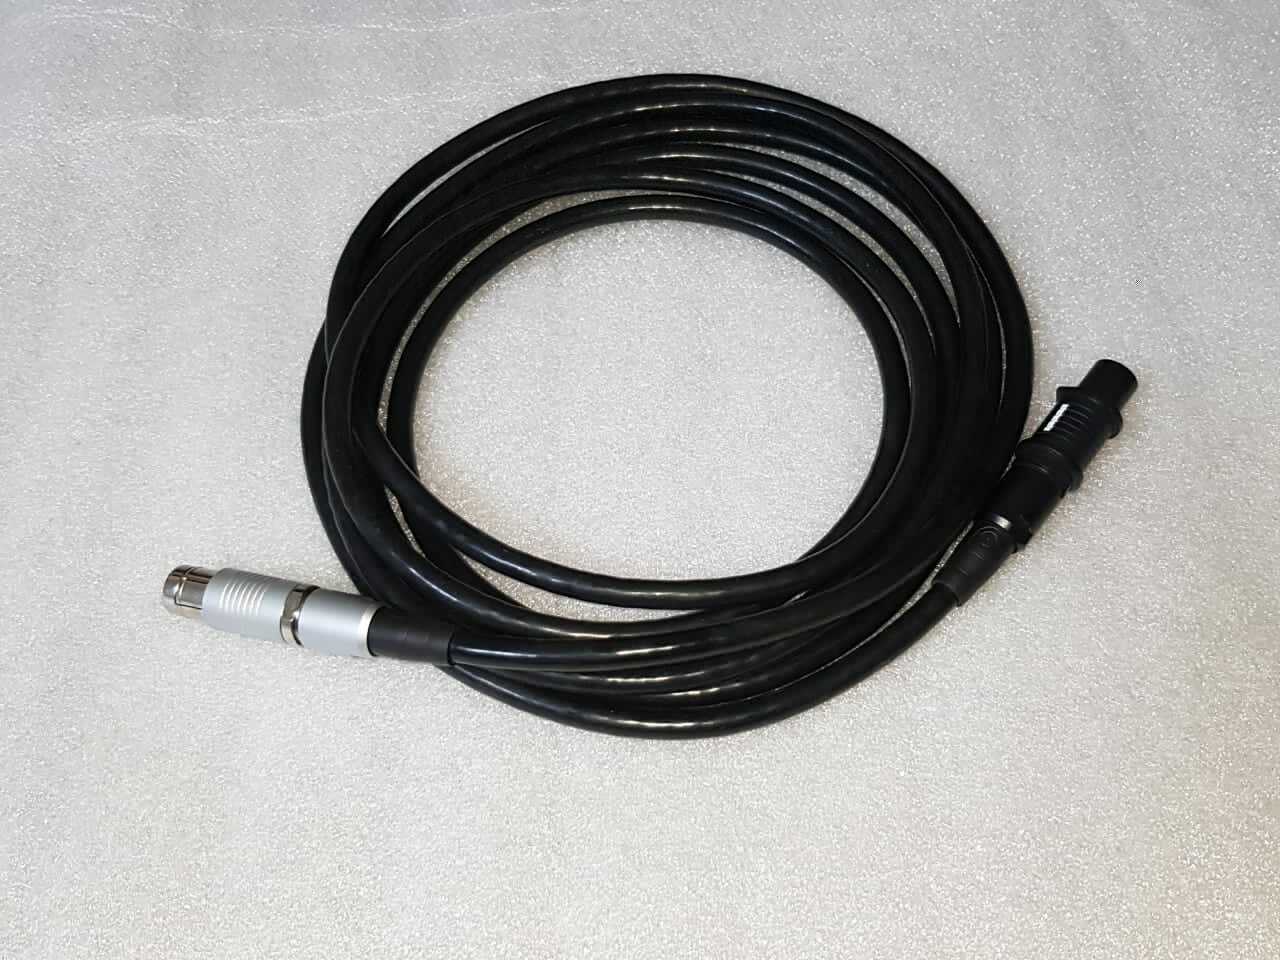 Stryker System 6 Handpiece Cable 